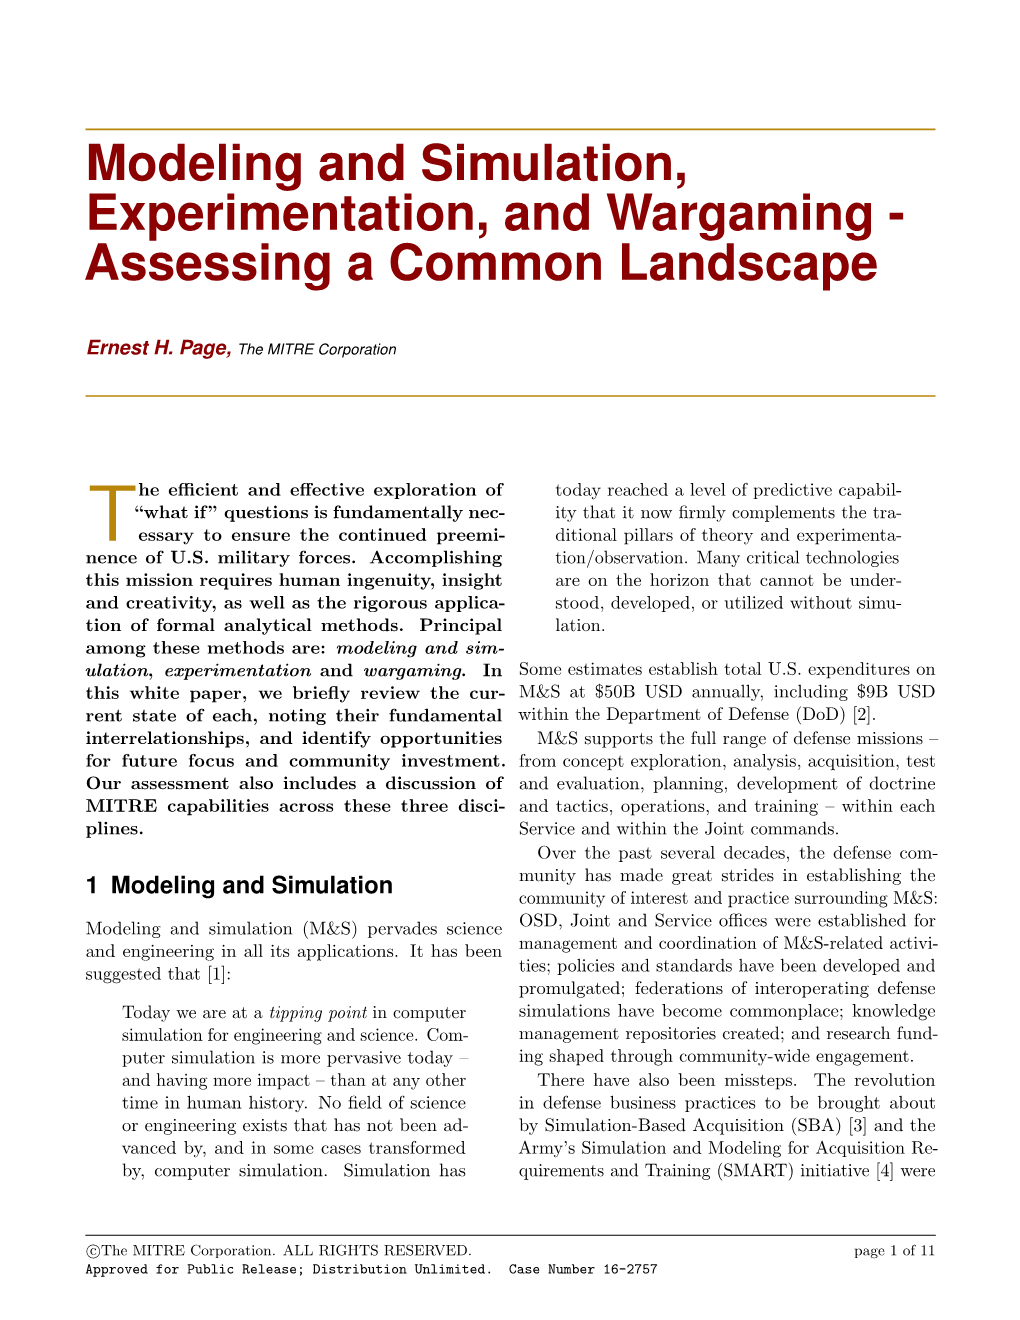 Modeling and Simulation, Experimentation, and Wargaming - Assessing a Common Landscape